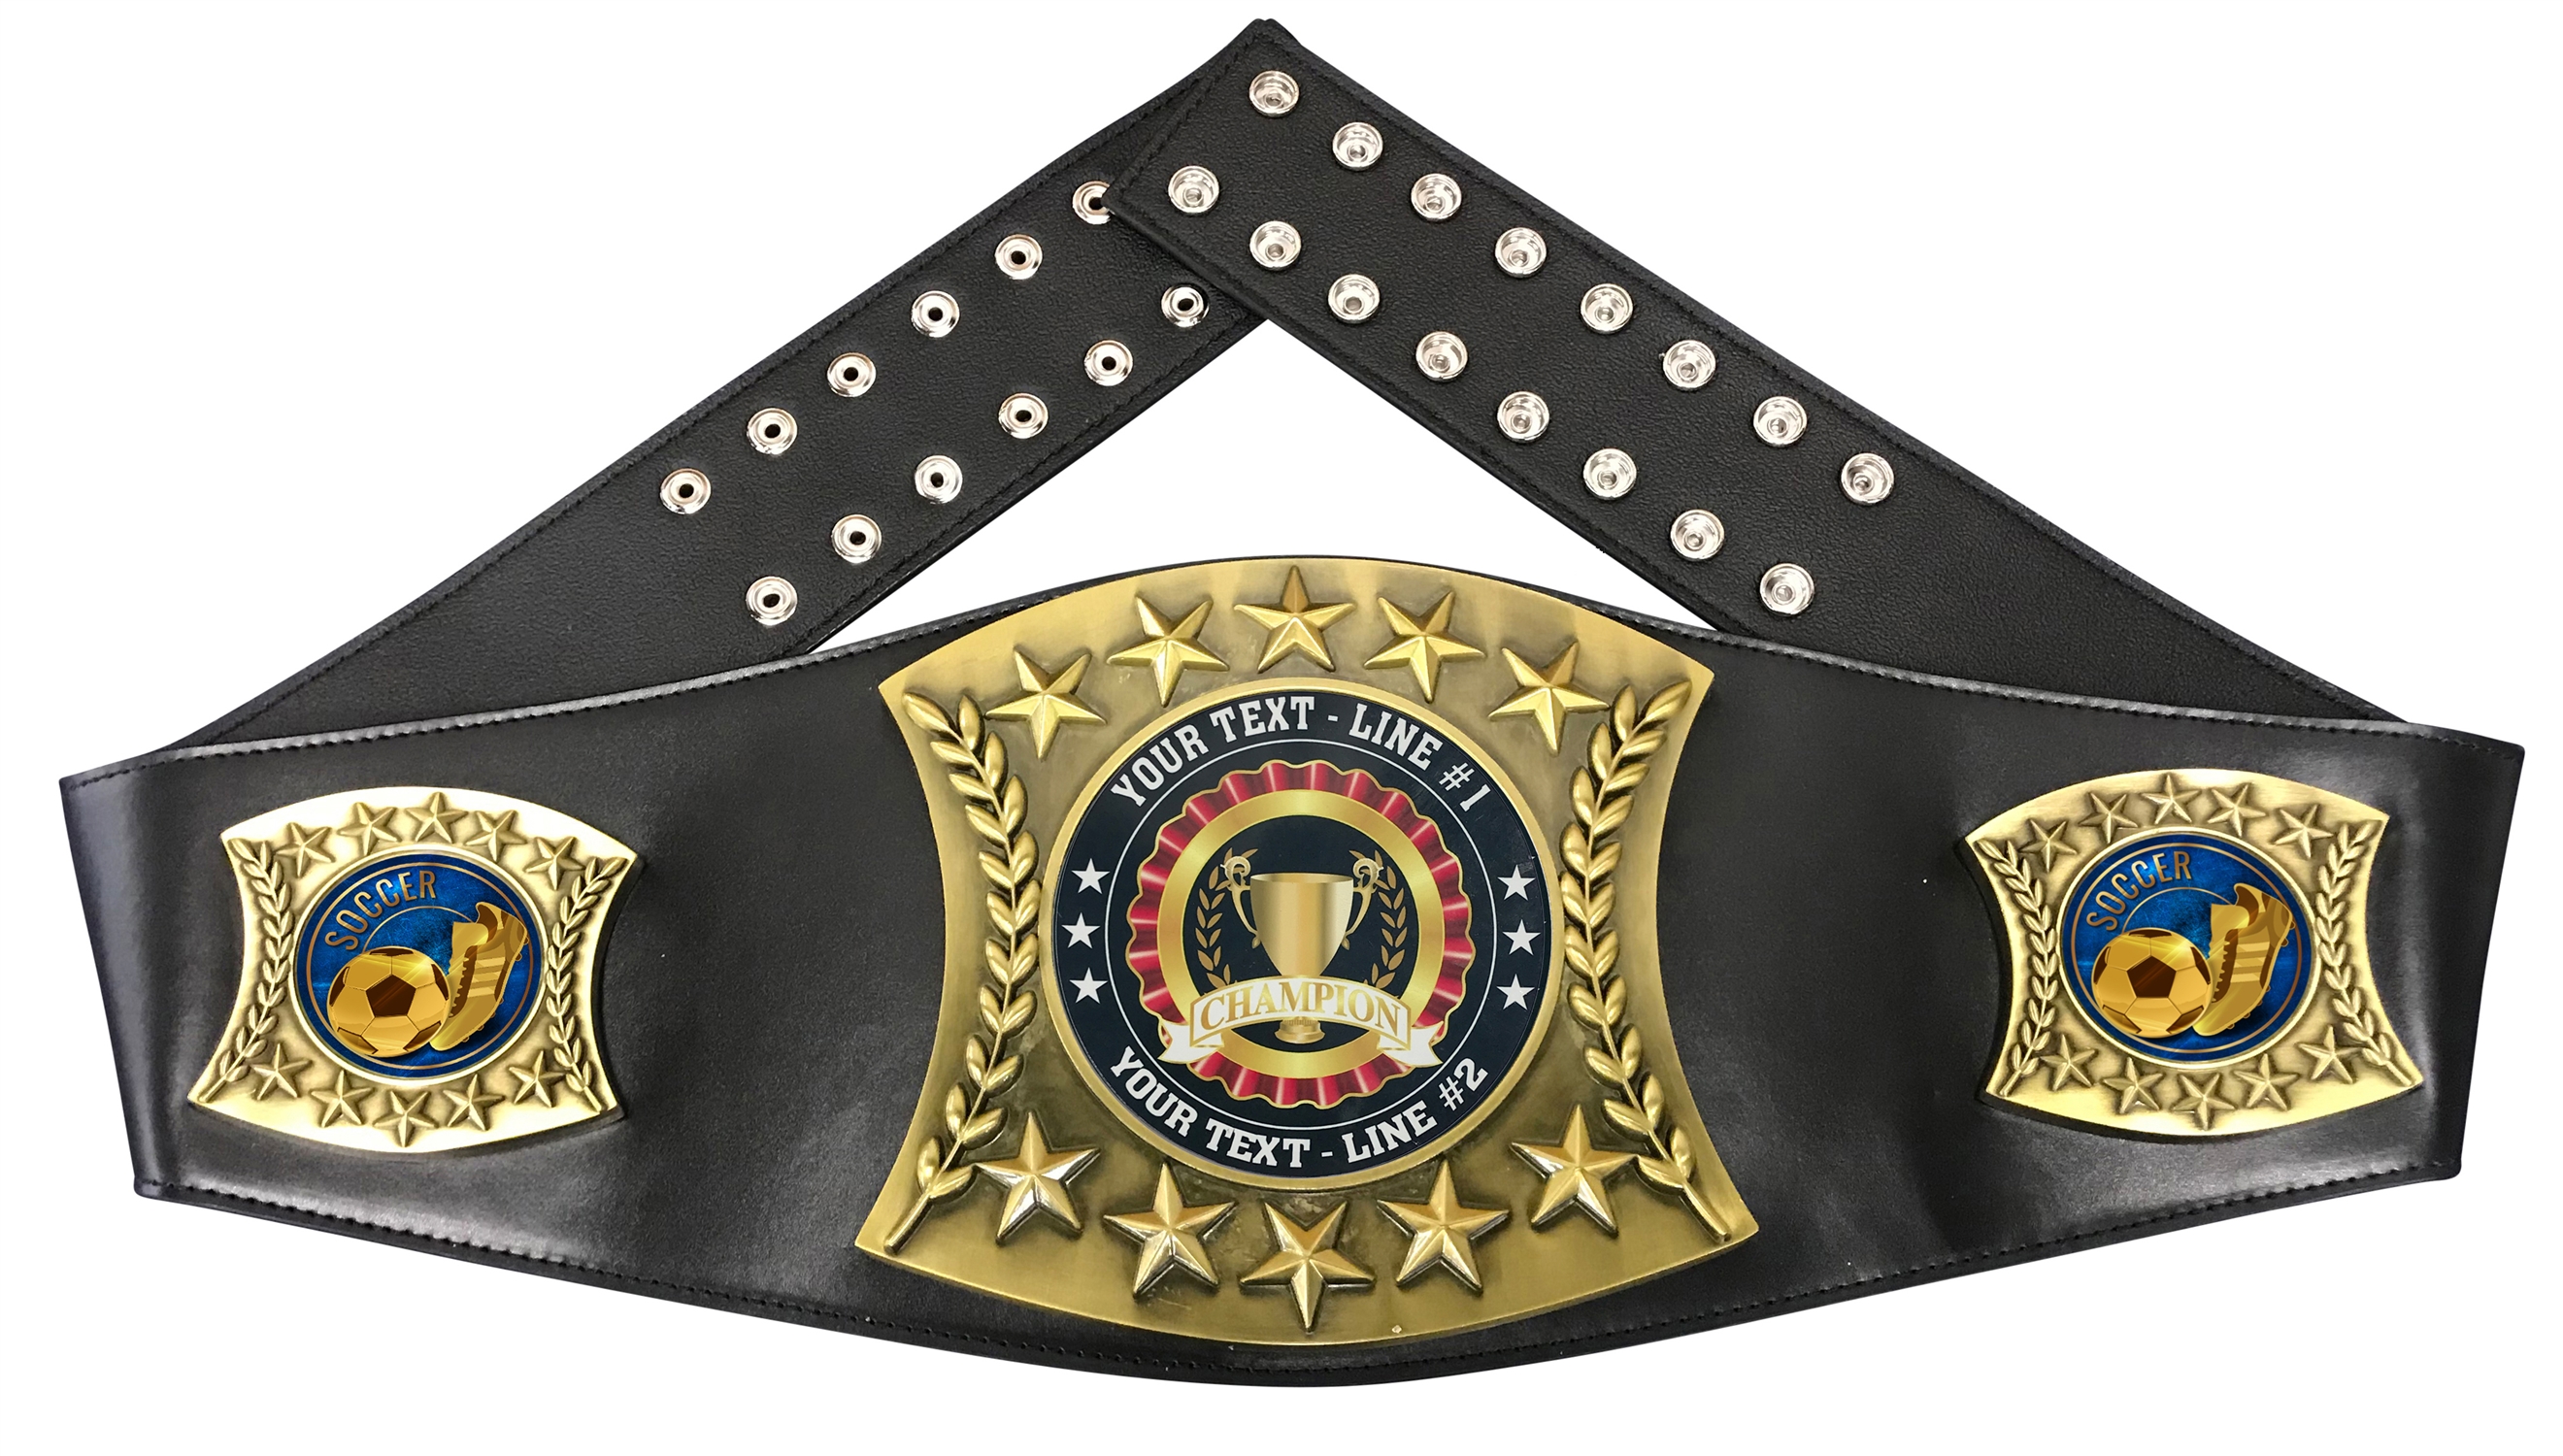 Soccer Personalized Championship Leather Belt